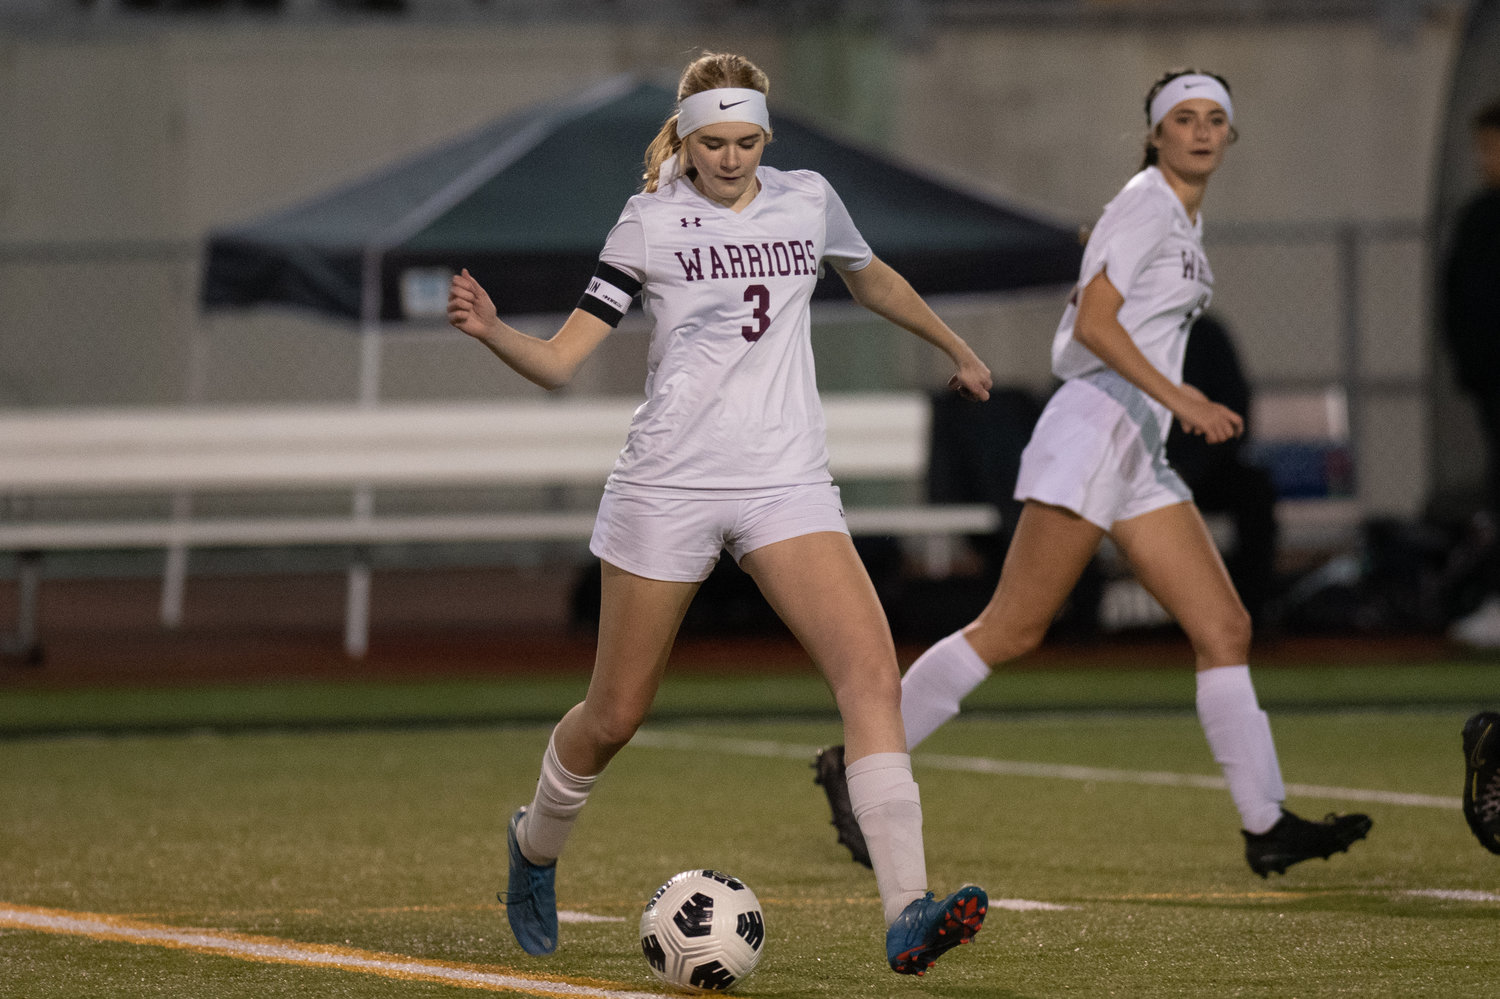 Cle Elum-Roslyn midfielder Avalon DeWitt dribbles a ball downfield against Adna in the opening round of the state tournament in Tumwater Nov. 10.